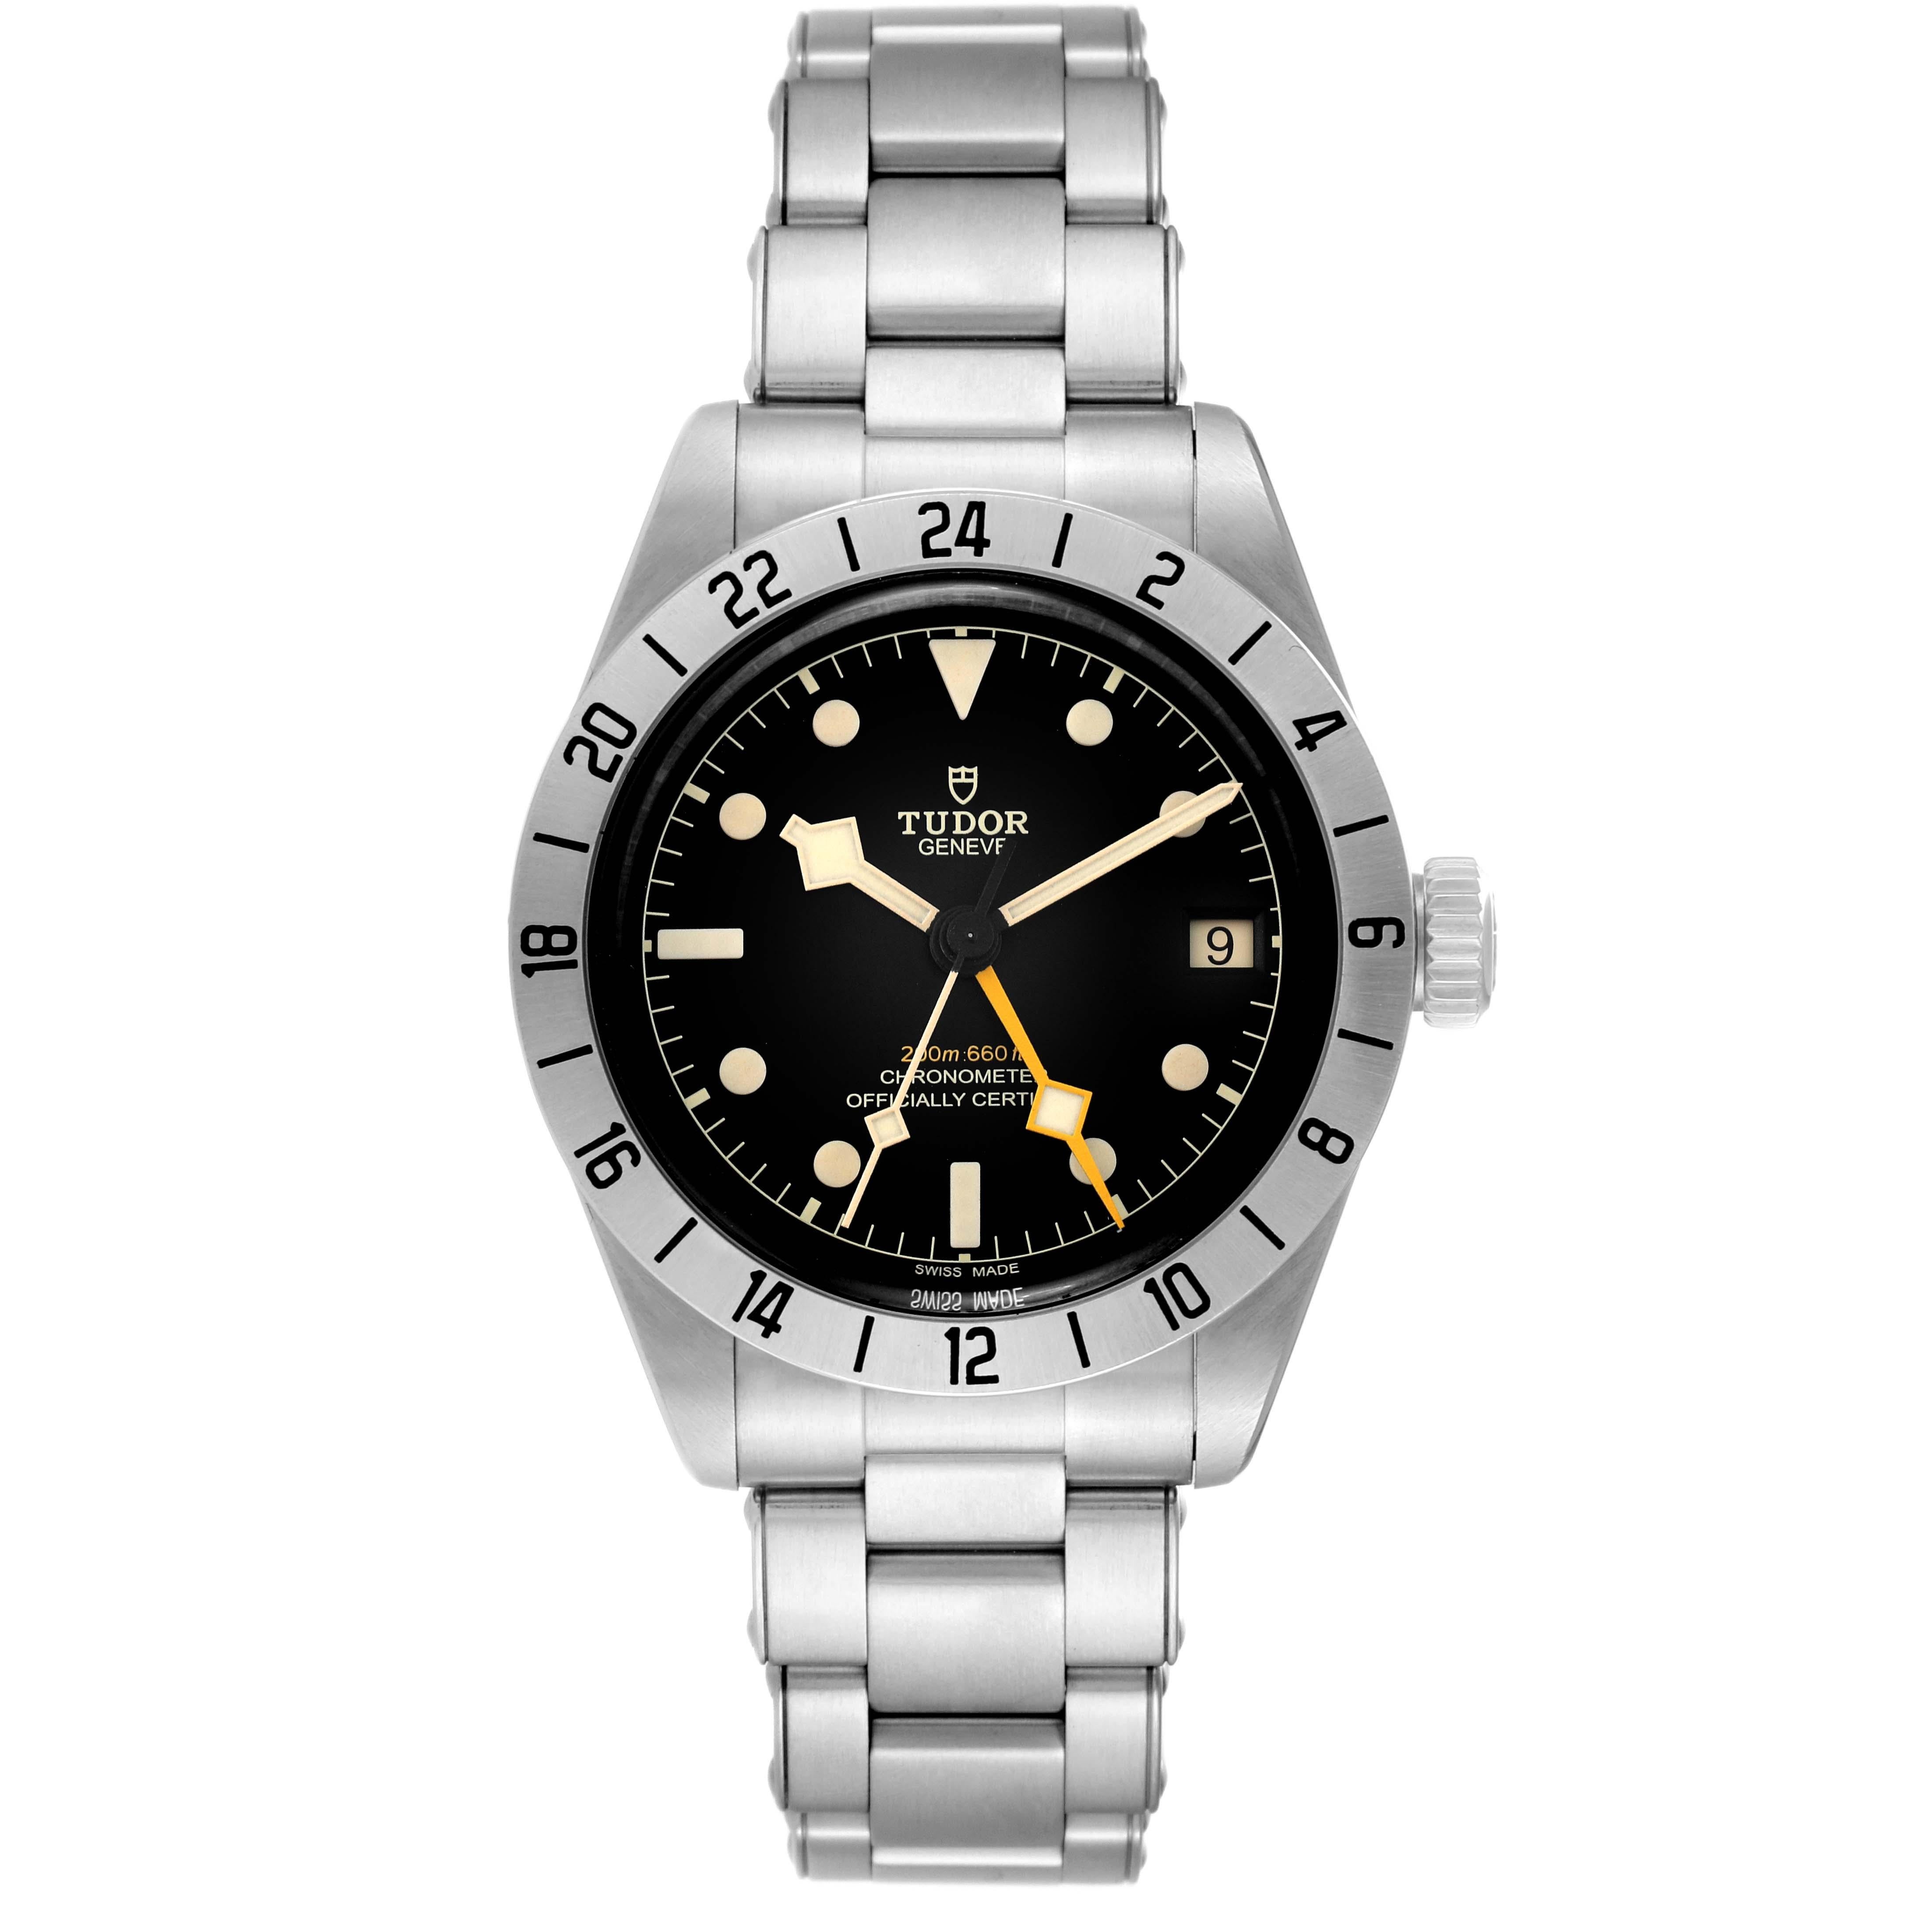 Tudor Black Bay Pro GMT Stainless Steel Mens Watch M79470 Box Card. Automatic self-winding movement. Stainless steel case 39.0 mm in diameter. Tudor logo on the crown. Stainless steel 24 hour graduated bezel with satin finish. Scratch resistant